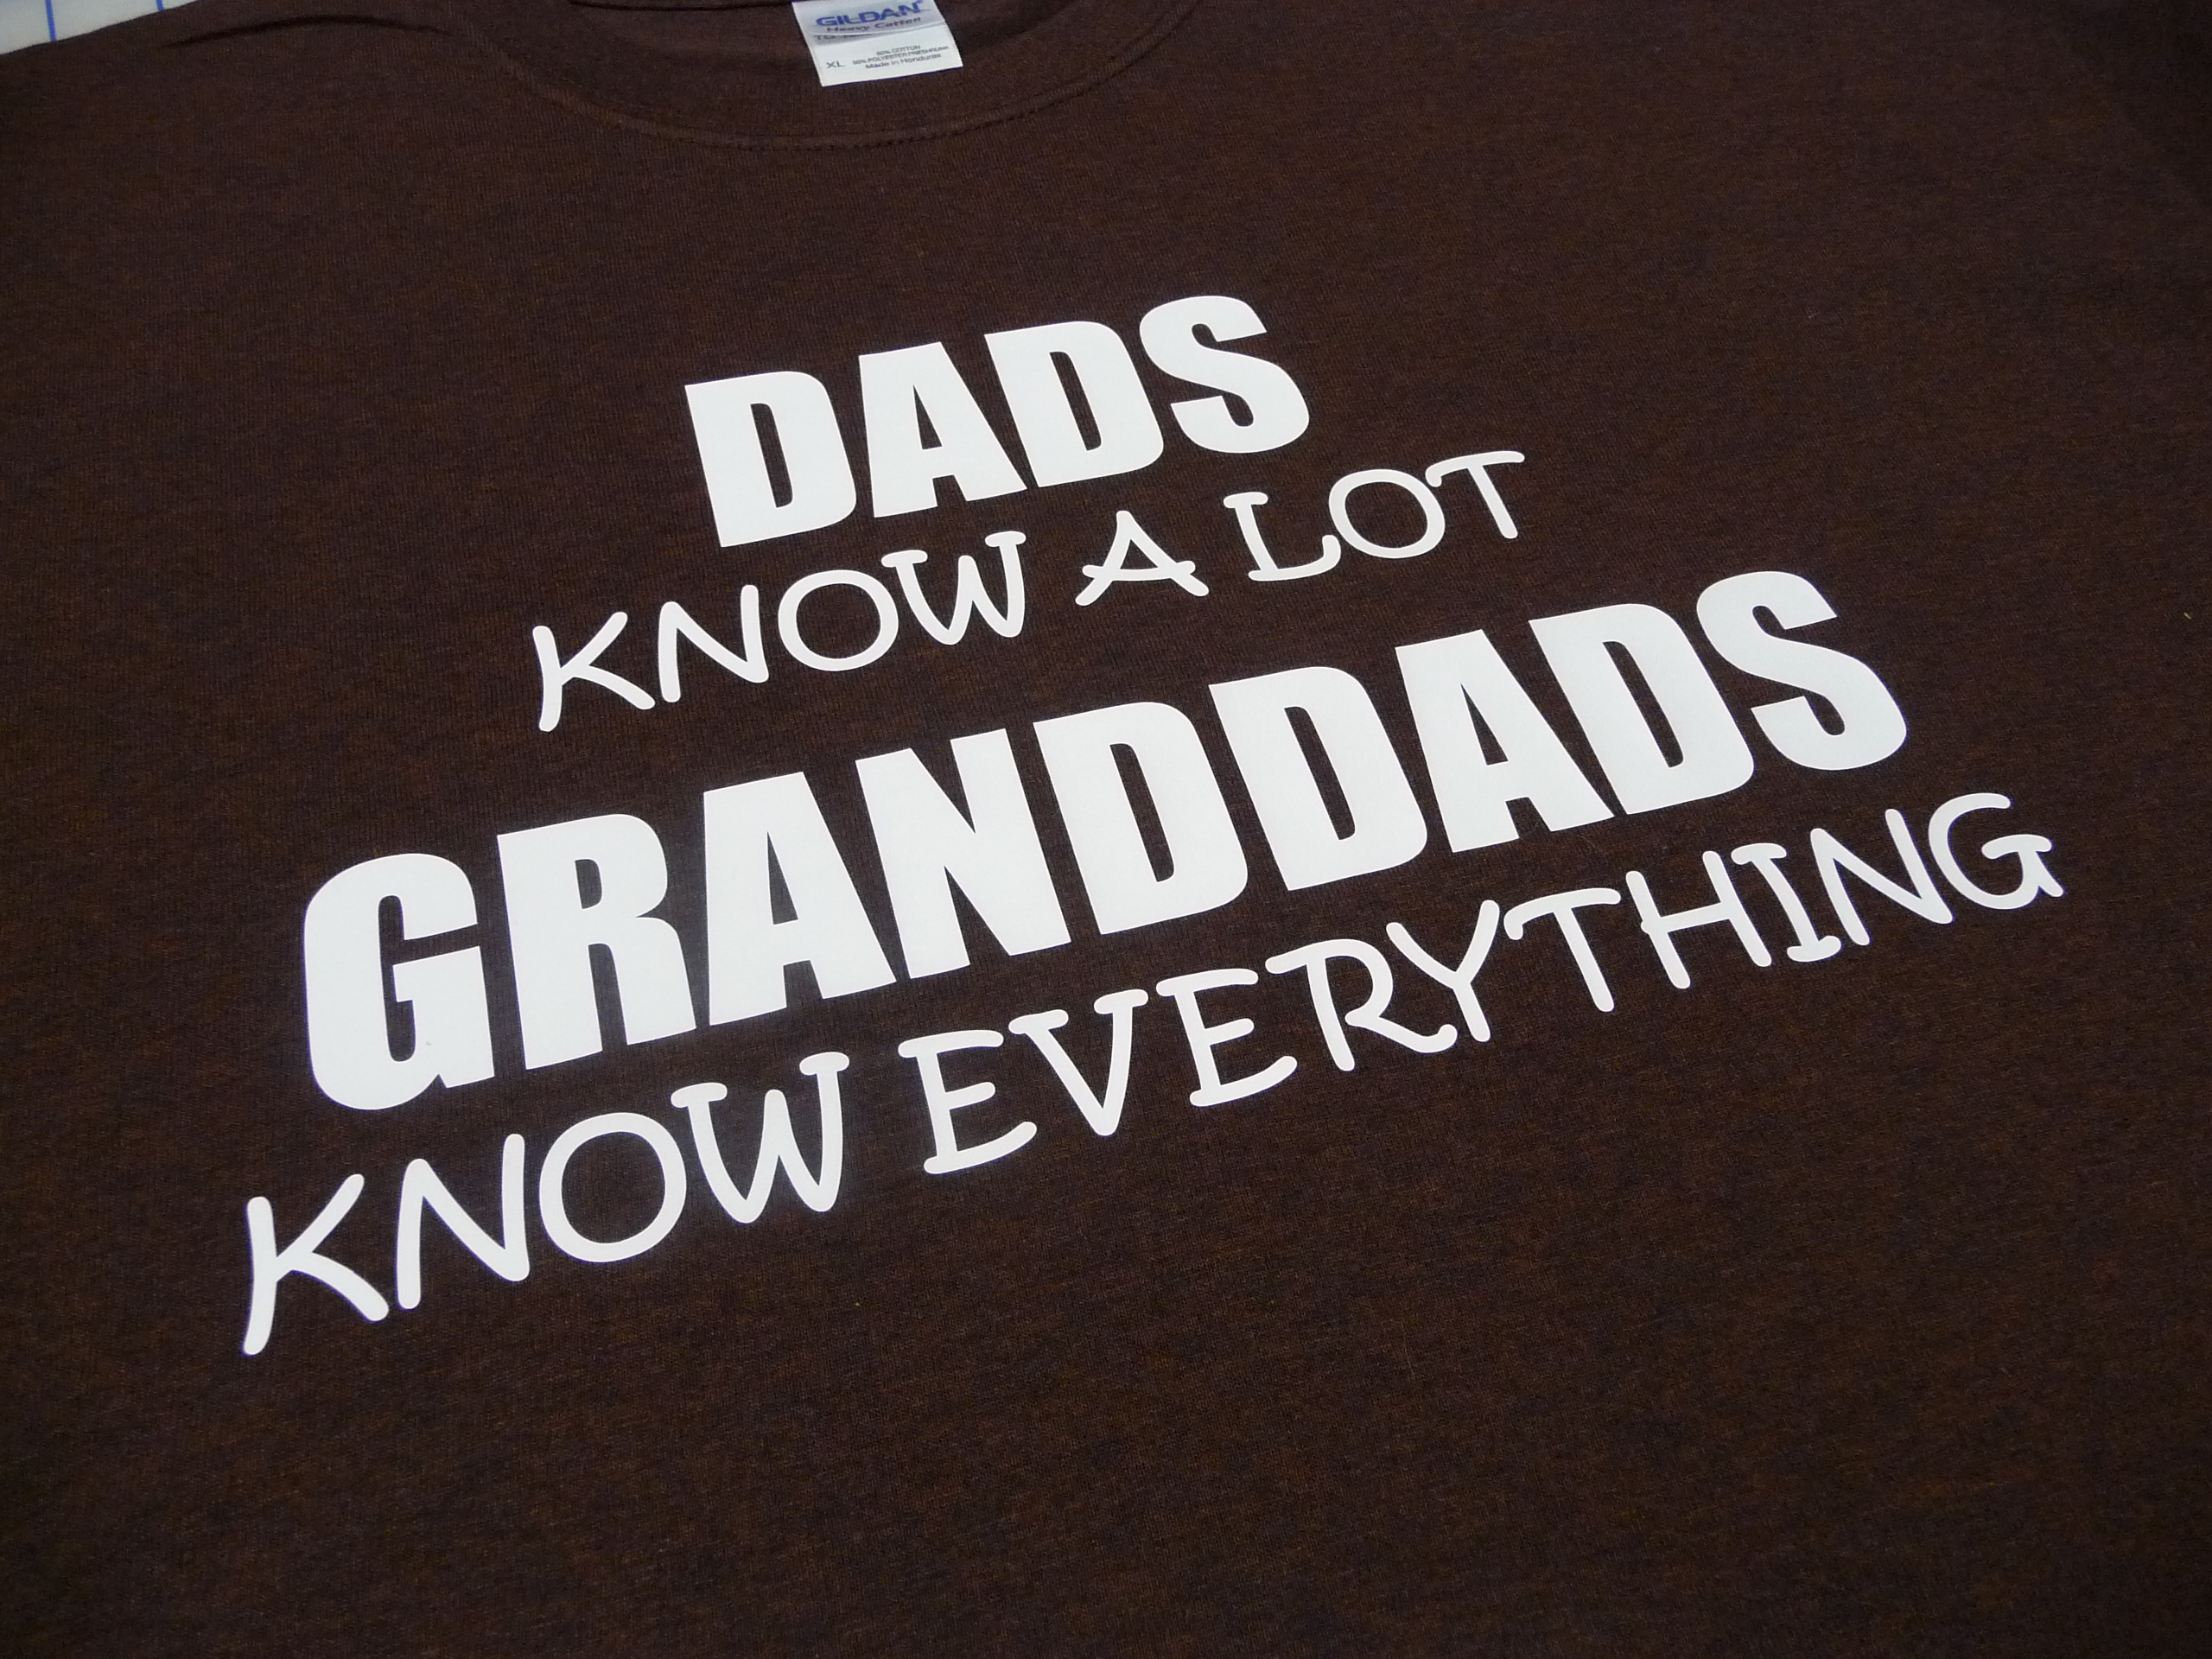 DADS KNOW A LOT GRANDDADS KNOW EVERYTHING T-Shirt